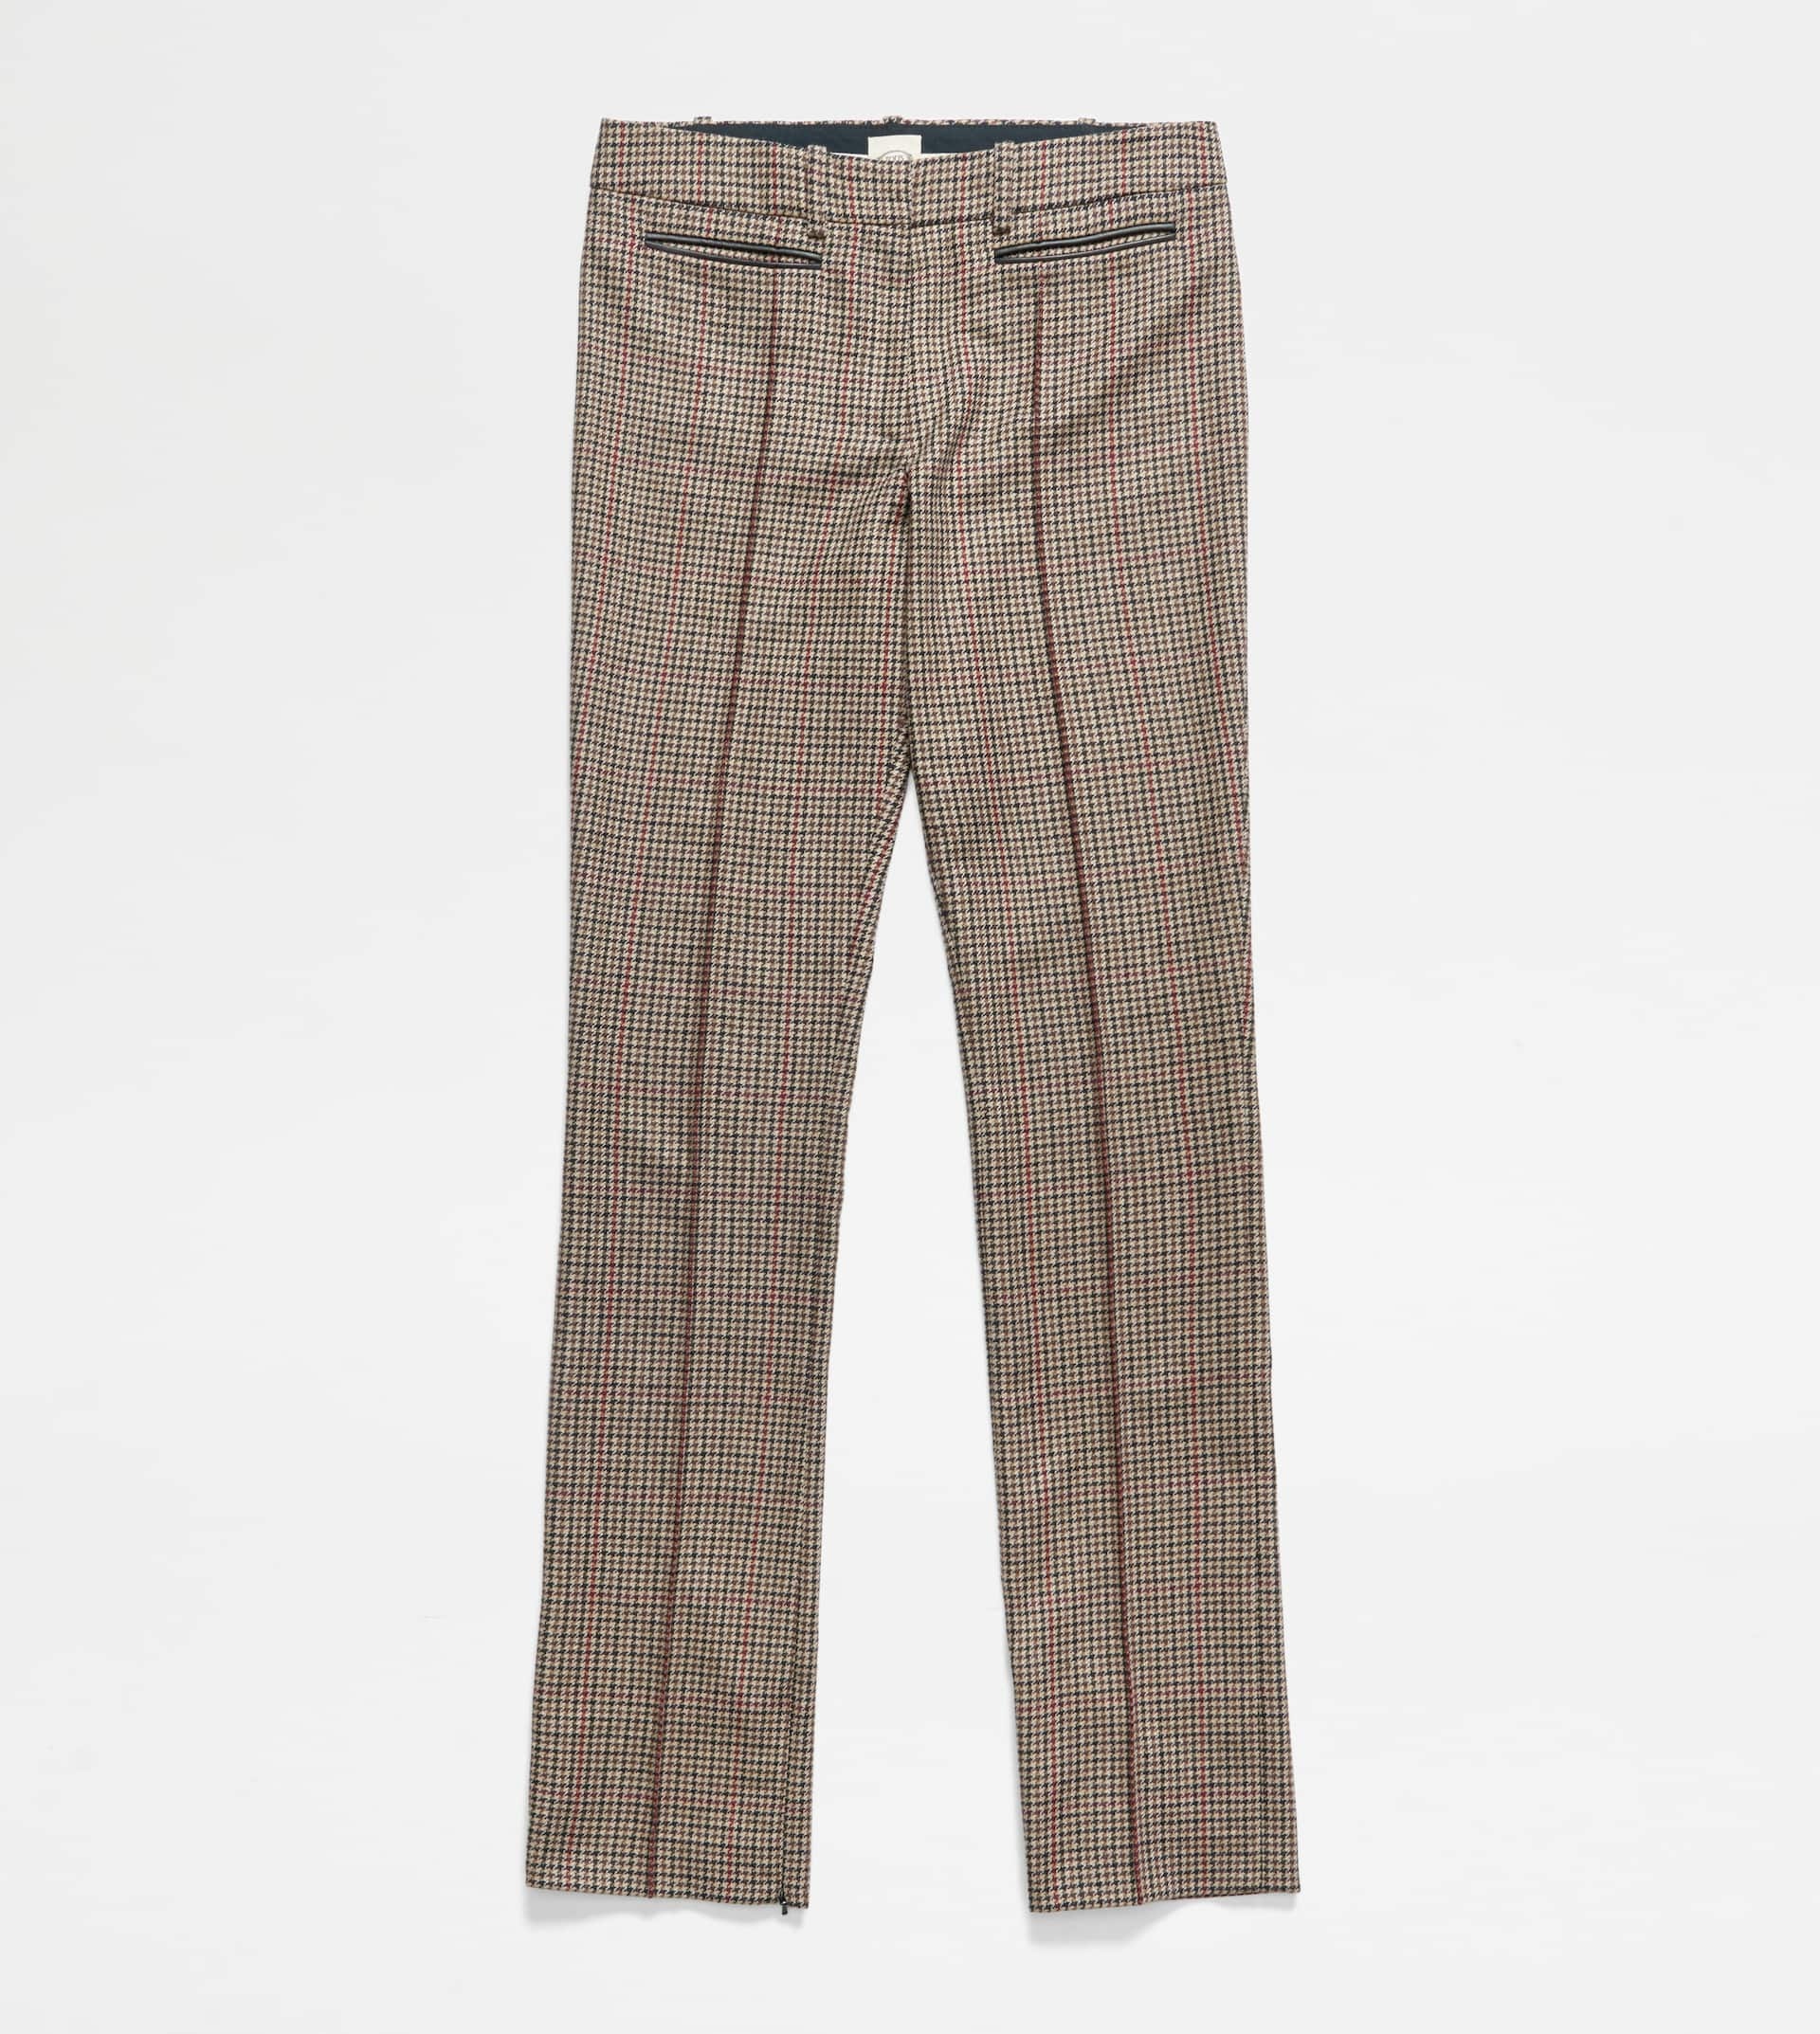 MIXED WOOL TROUSERS - RED, BLUE, BROWN - 1